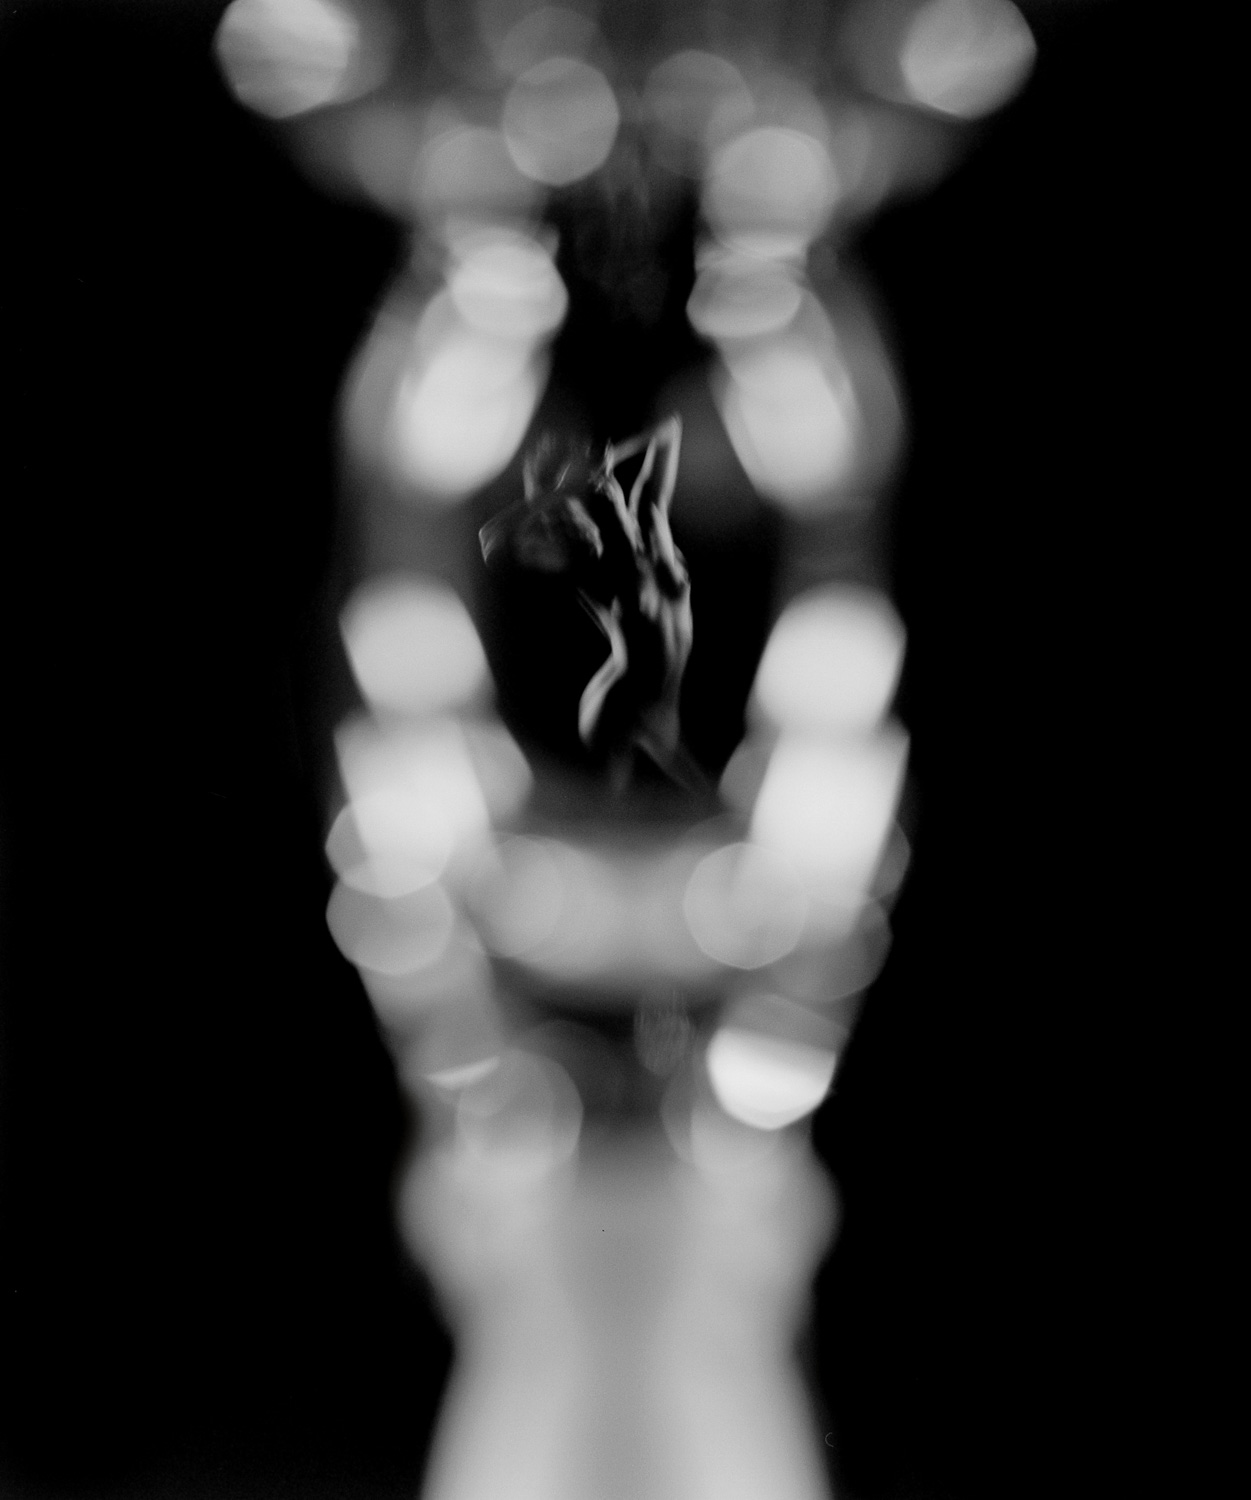 Black and white nudes, fine art photography, candelabra, nude art prints, bw fine art, refraction, reflection, in glass, female